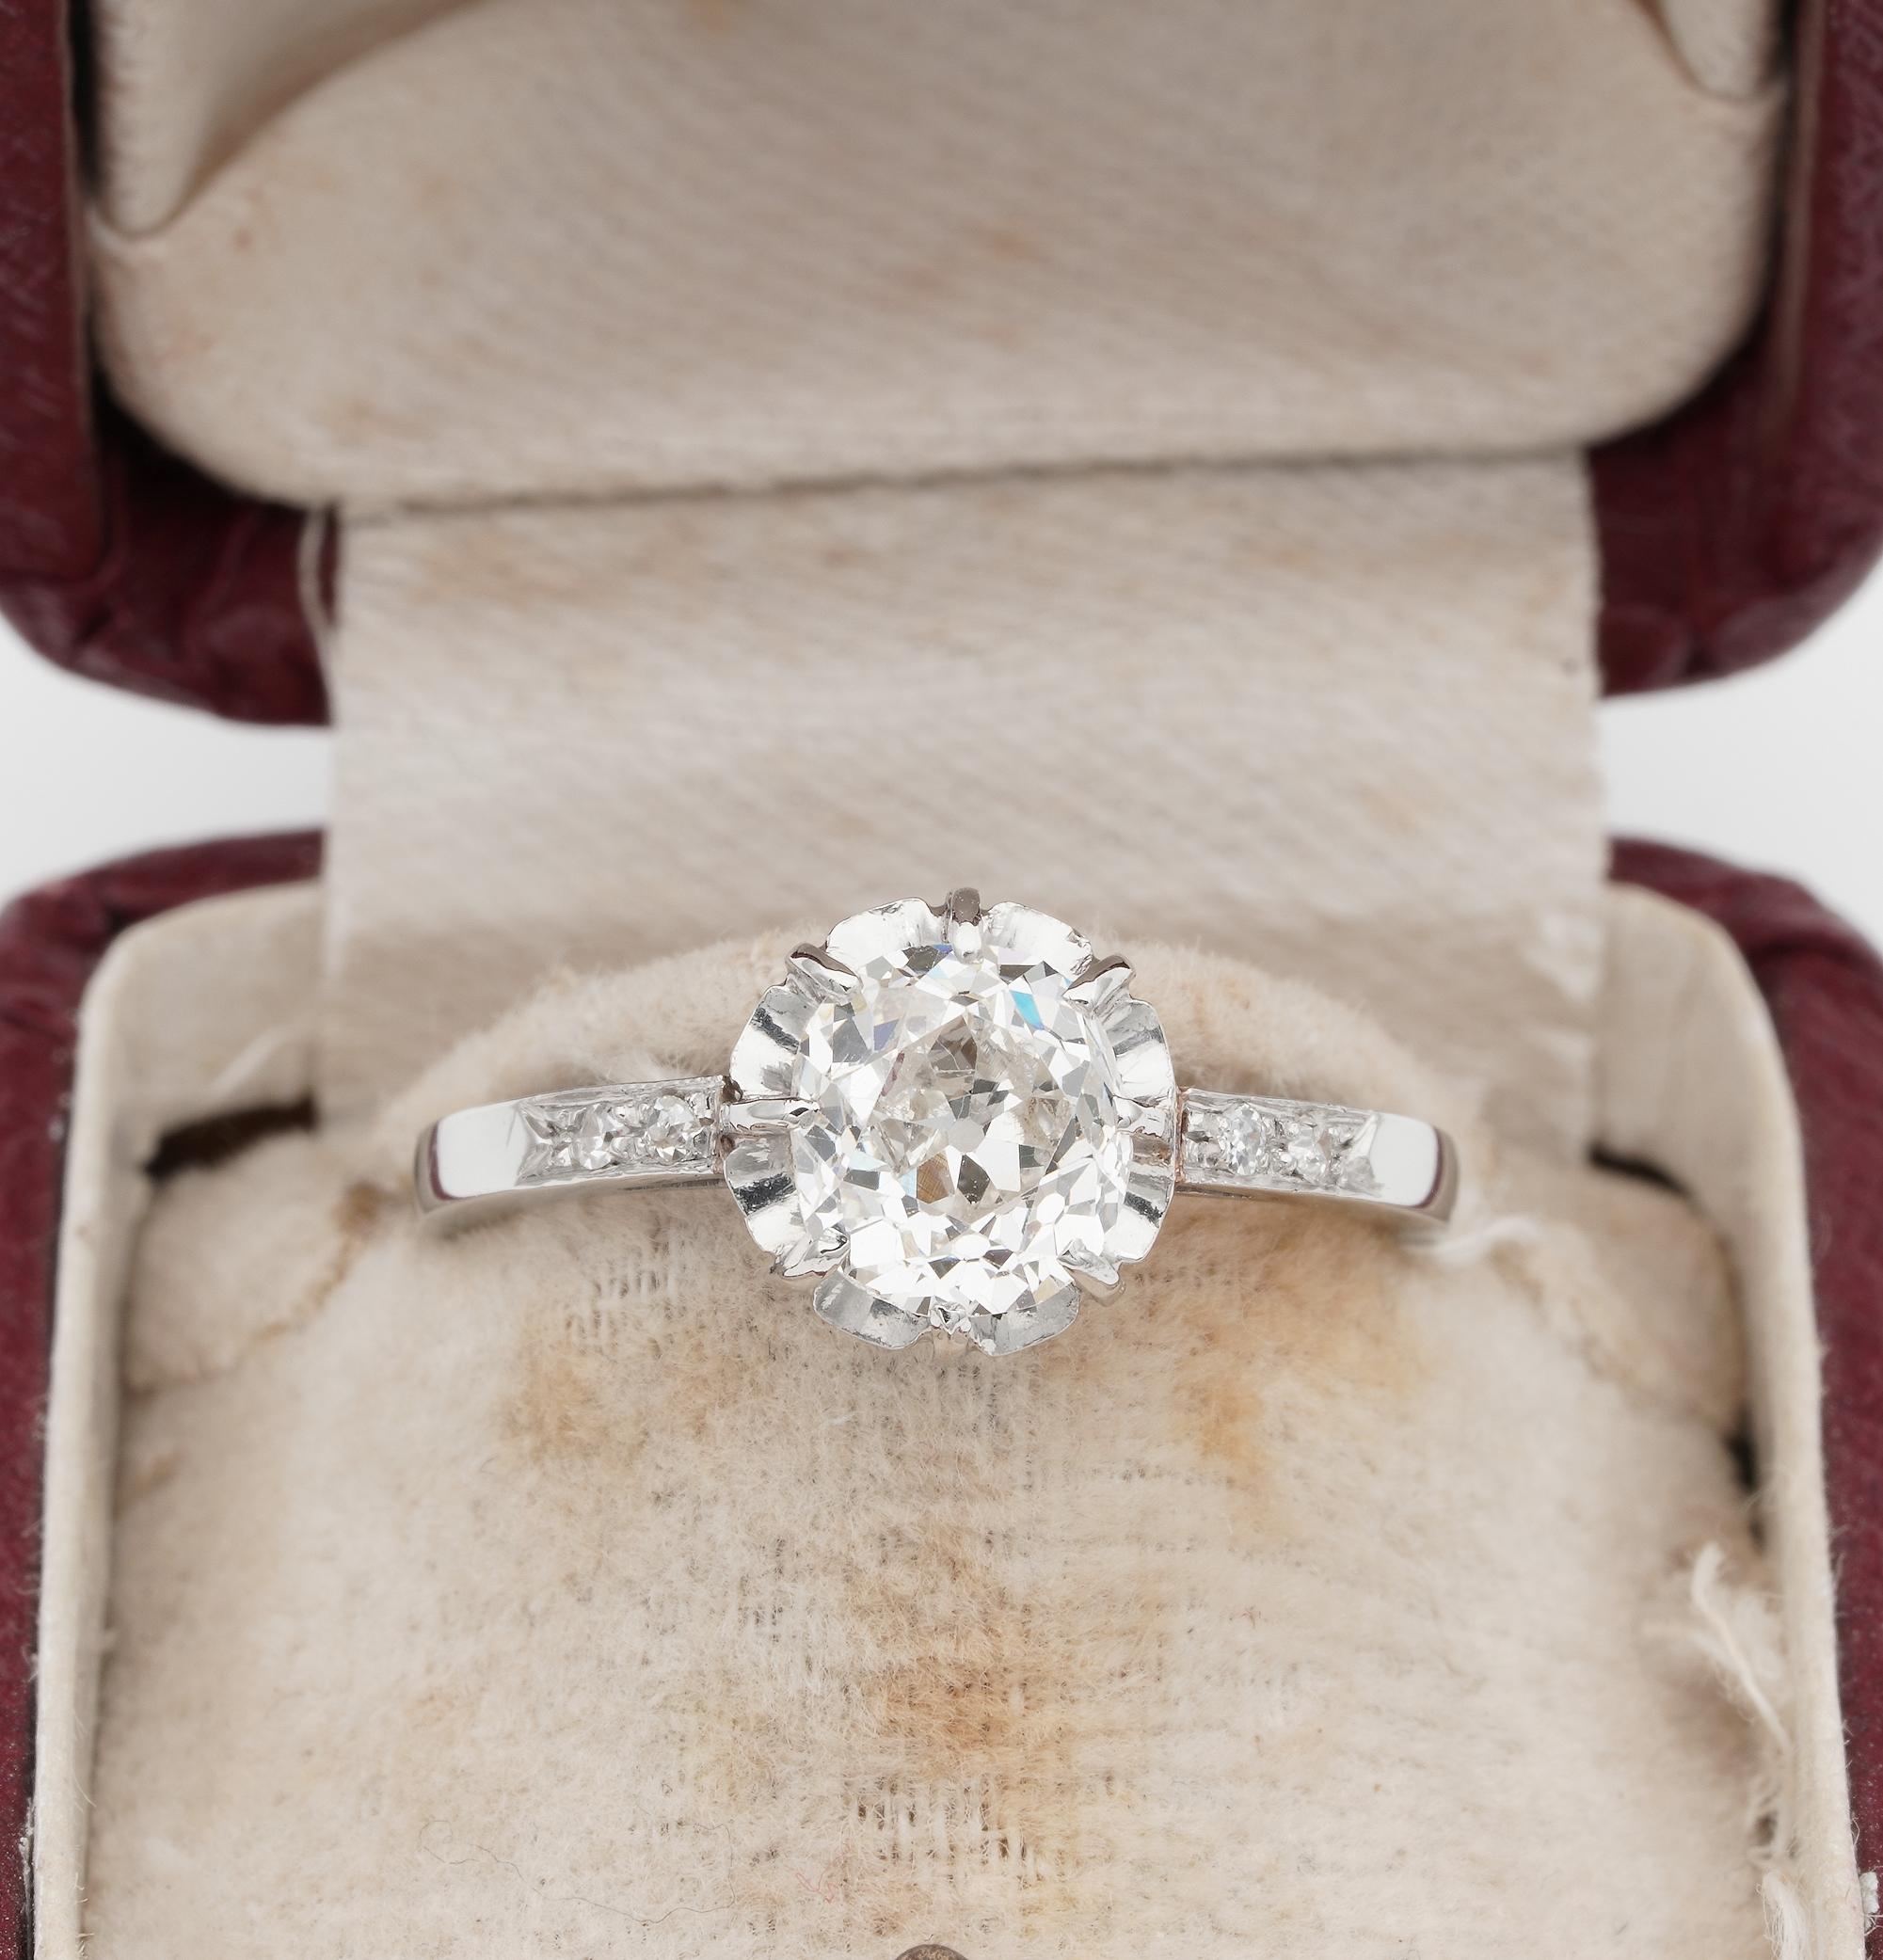 Love Me!

In absolute in the first place to declare love, Diamond solitaire ring is full of symbolism, no wonder why a favorite between all other gemstones for engagement
Special attention is usually given for the choice of an engagement ring, this